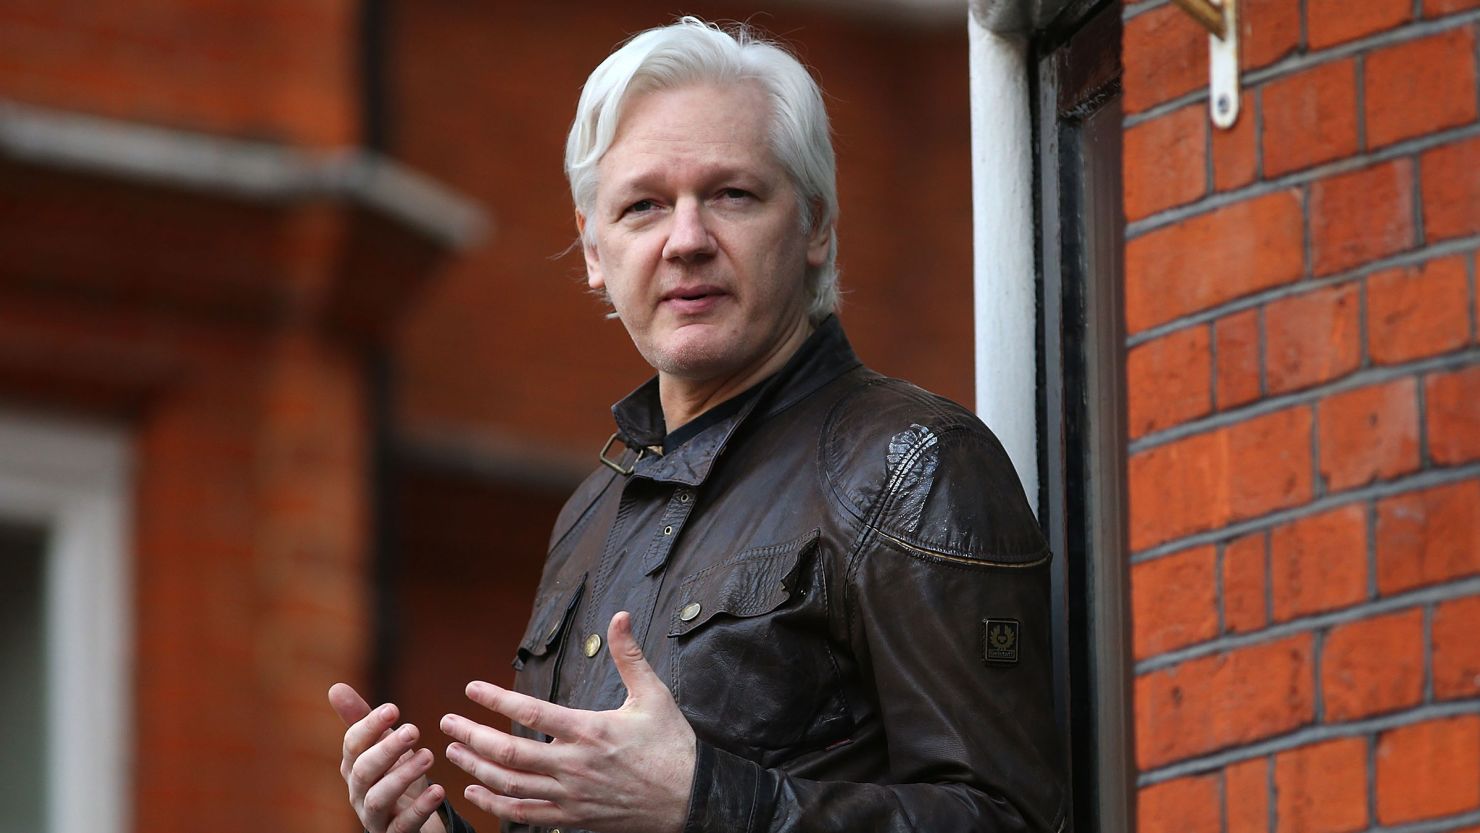 In this 2017 photo, Julian Assange speaks to the media from the balcony of the Embassy Of Ecuador on May 19, 2017 in London, England.